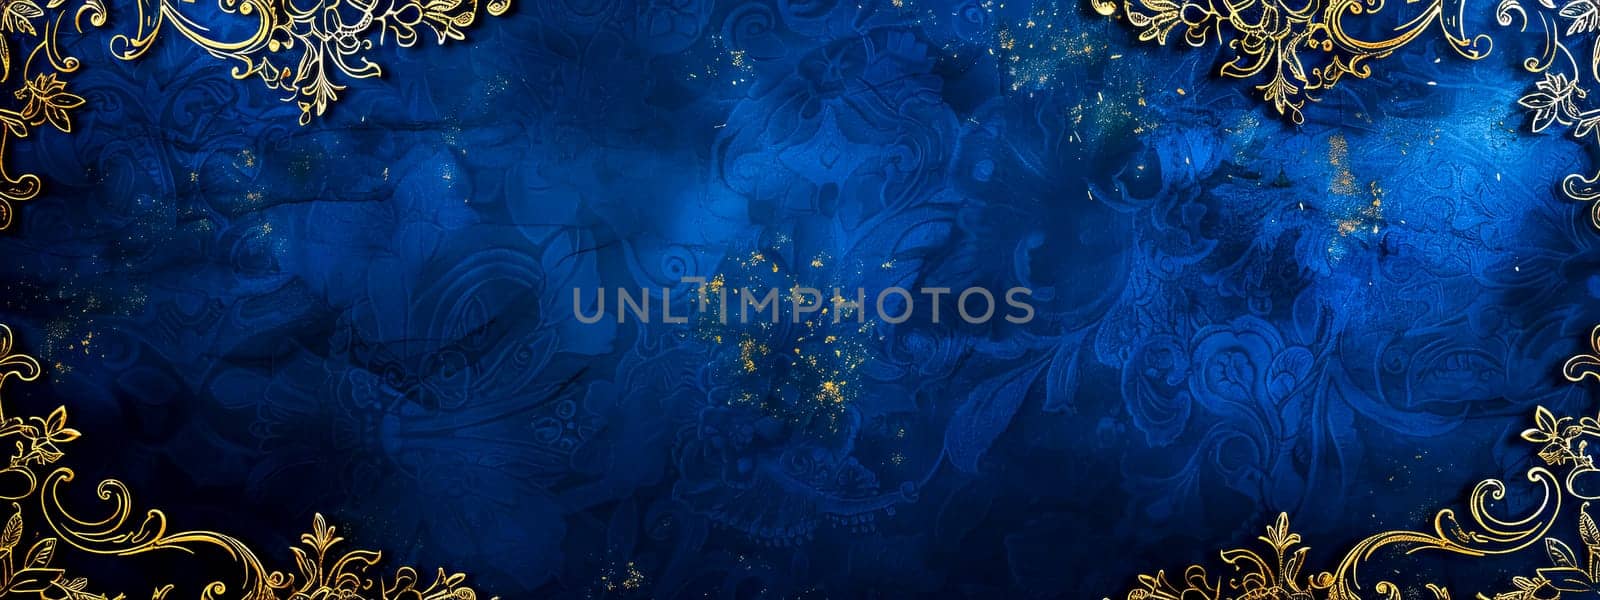 Luxurious dark blue background with ornate gold floral patterns and sparkling accents